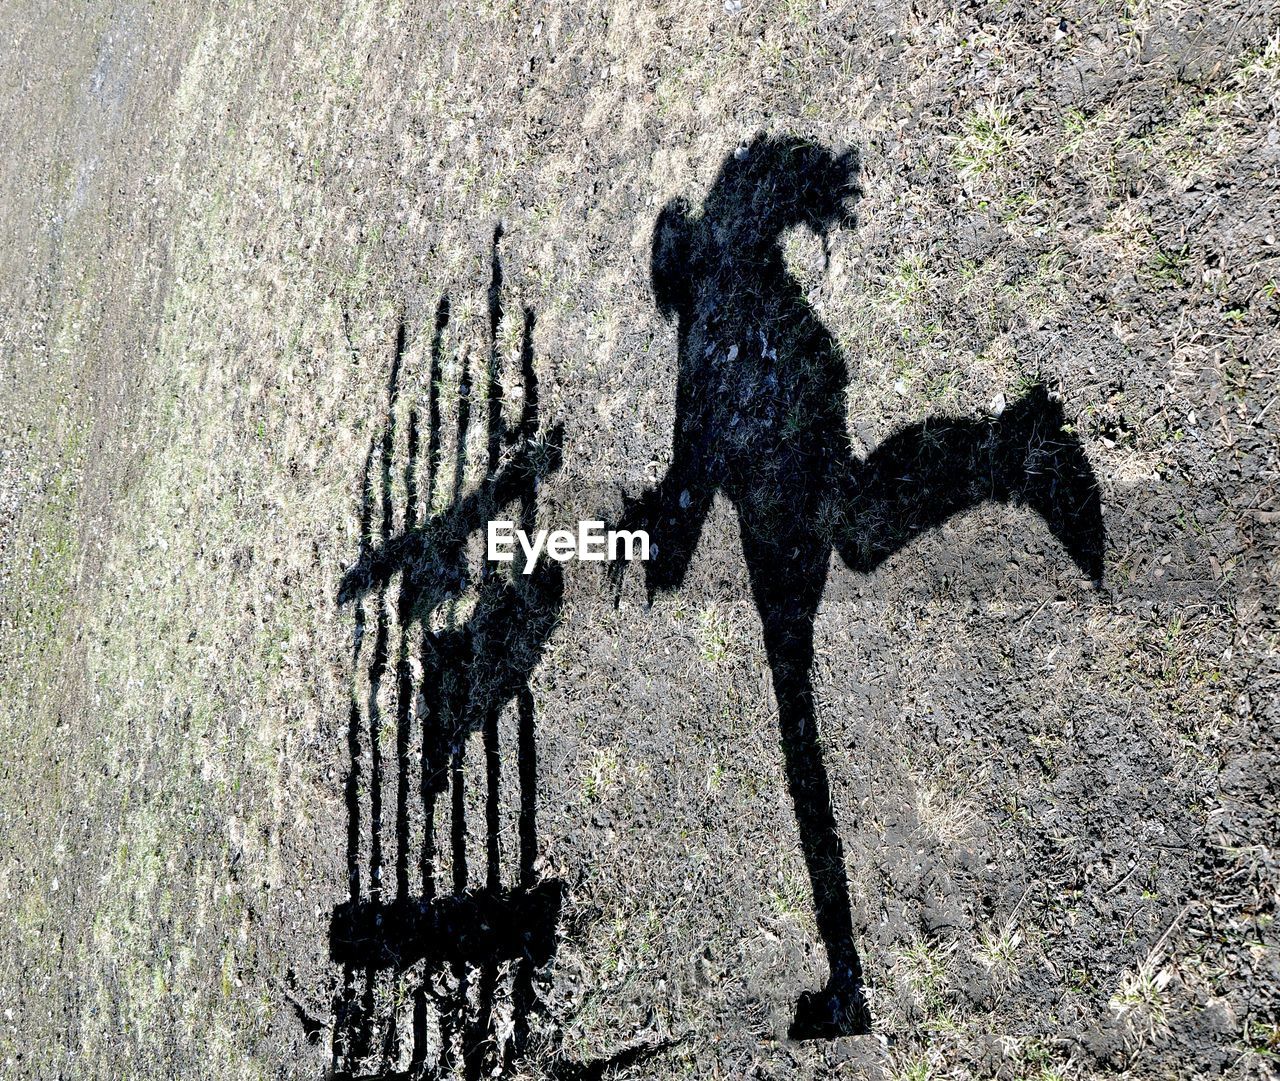 High angle view of person and fence shadow on field